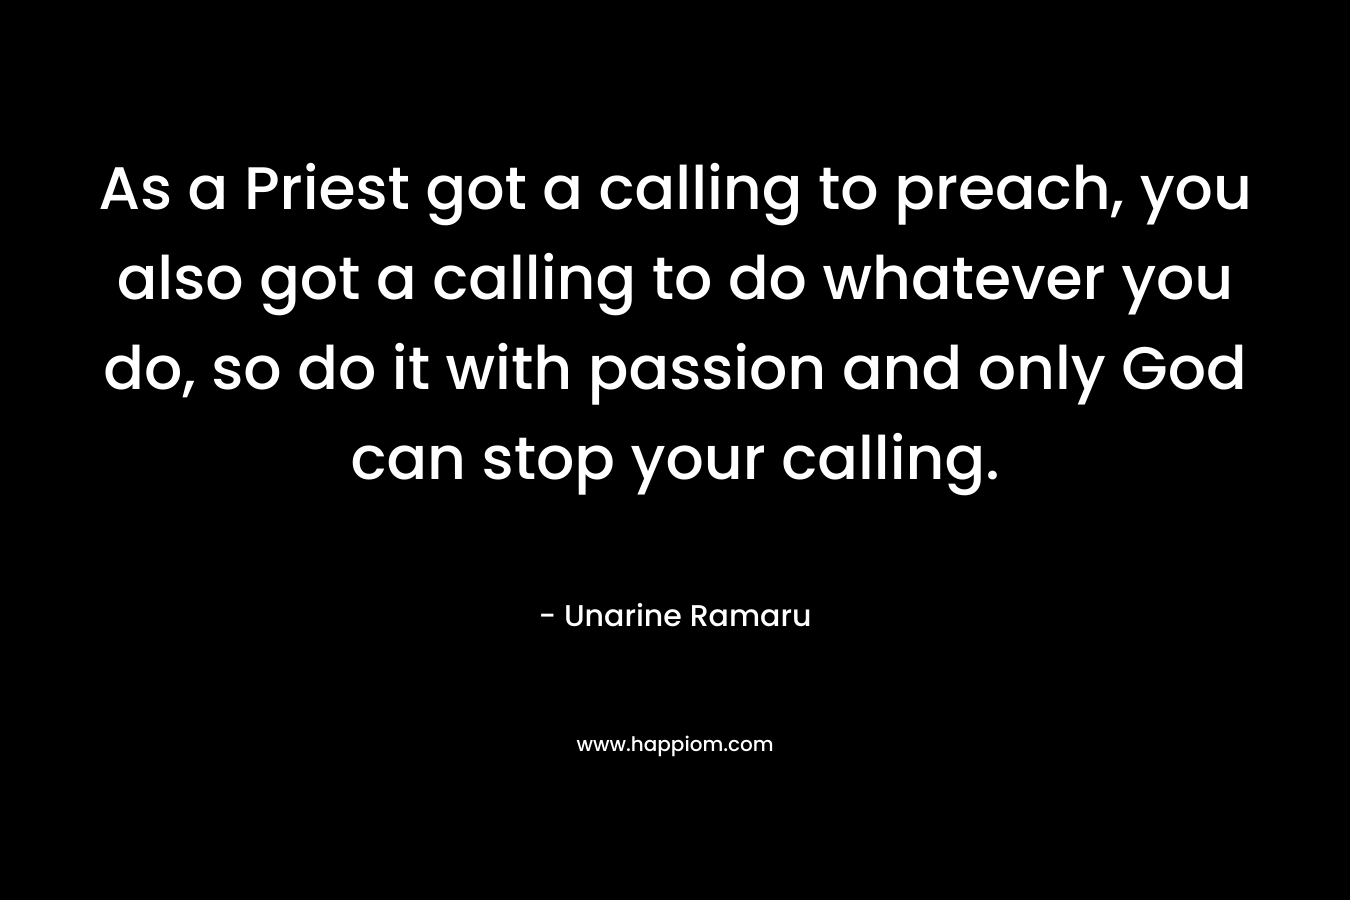 As a Priest got a calling to preach, you also got a calling to do whatever you do, so do it with passion and only God can stop your calling.